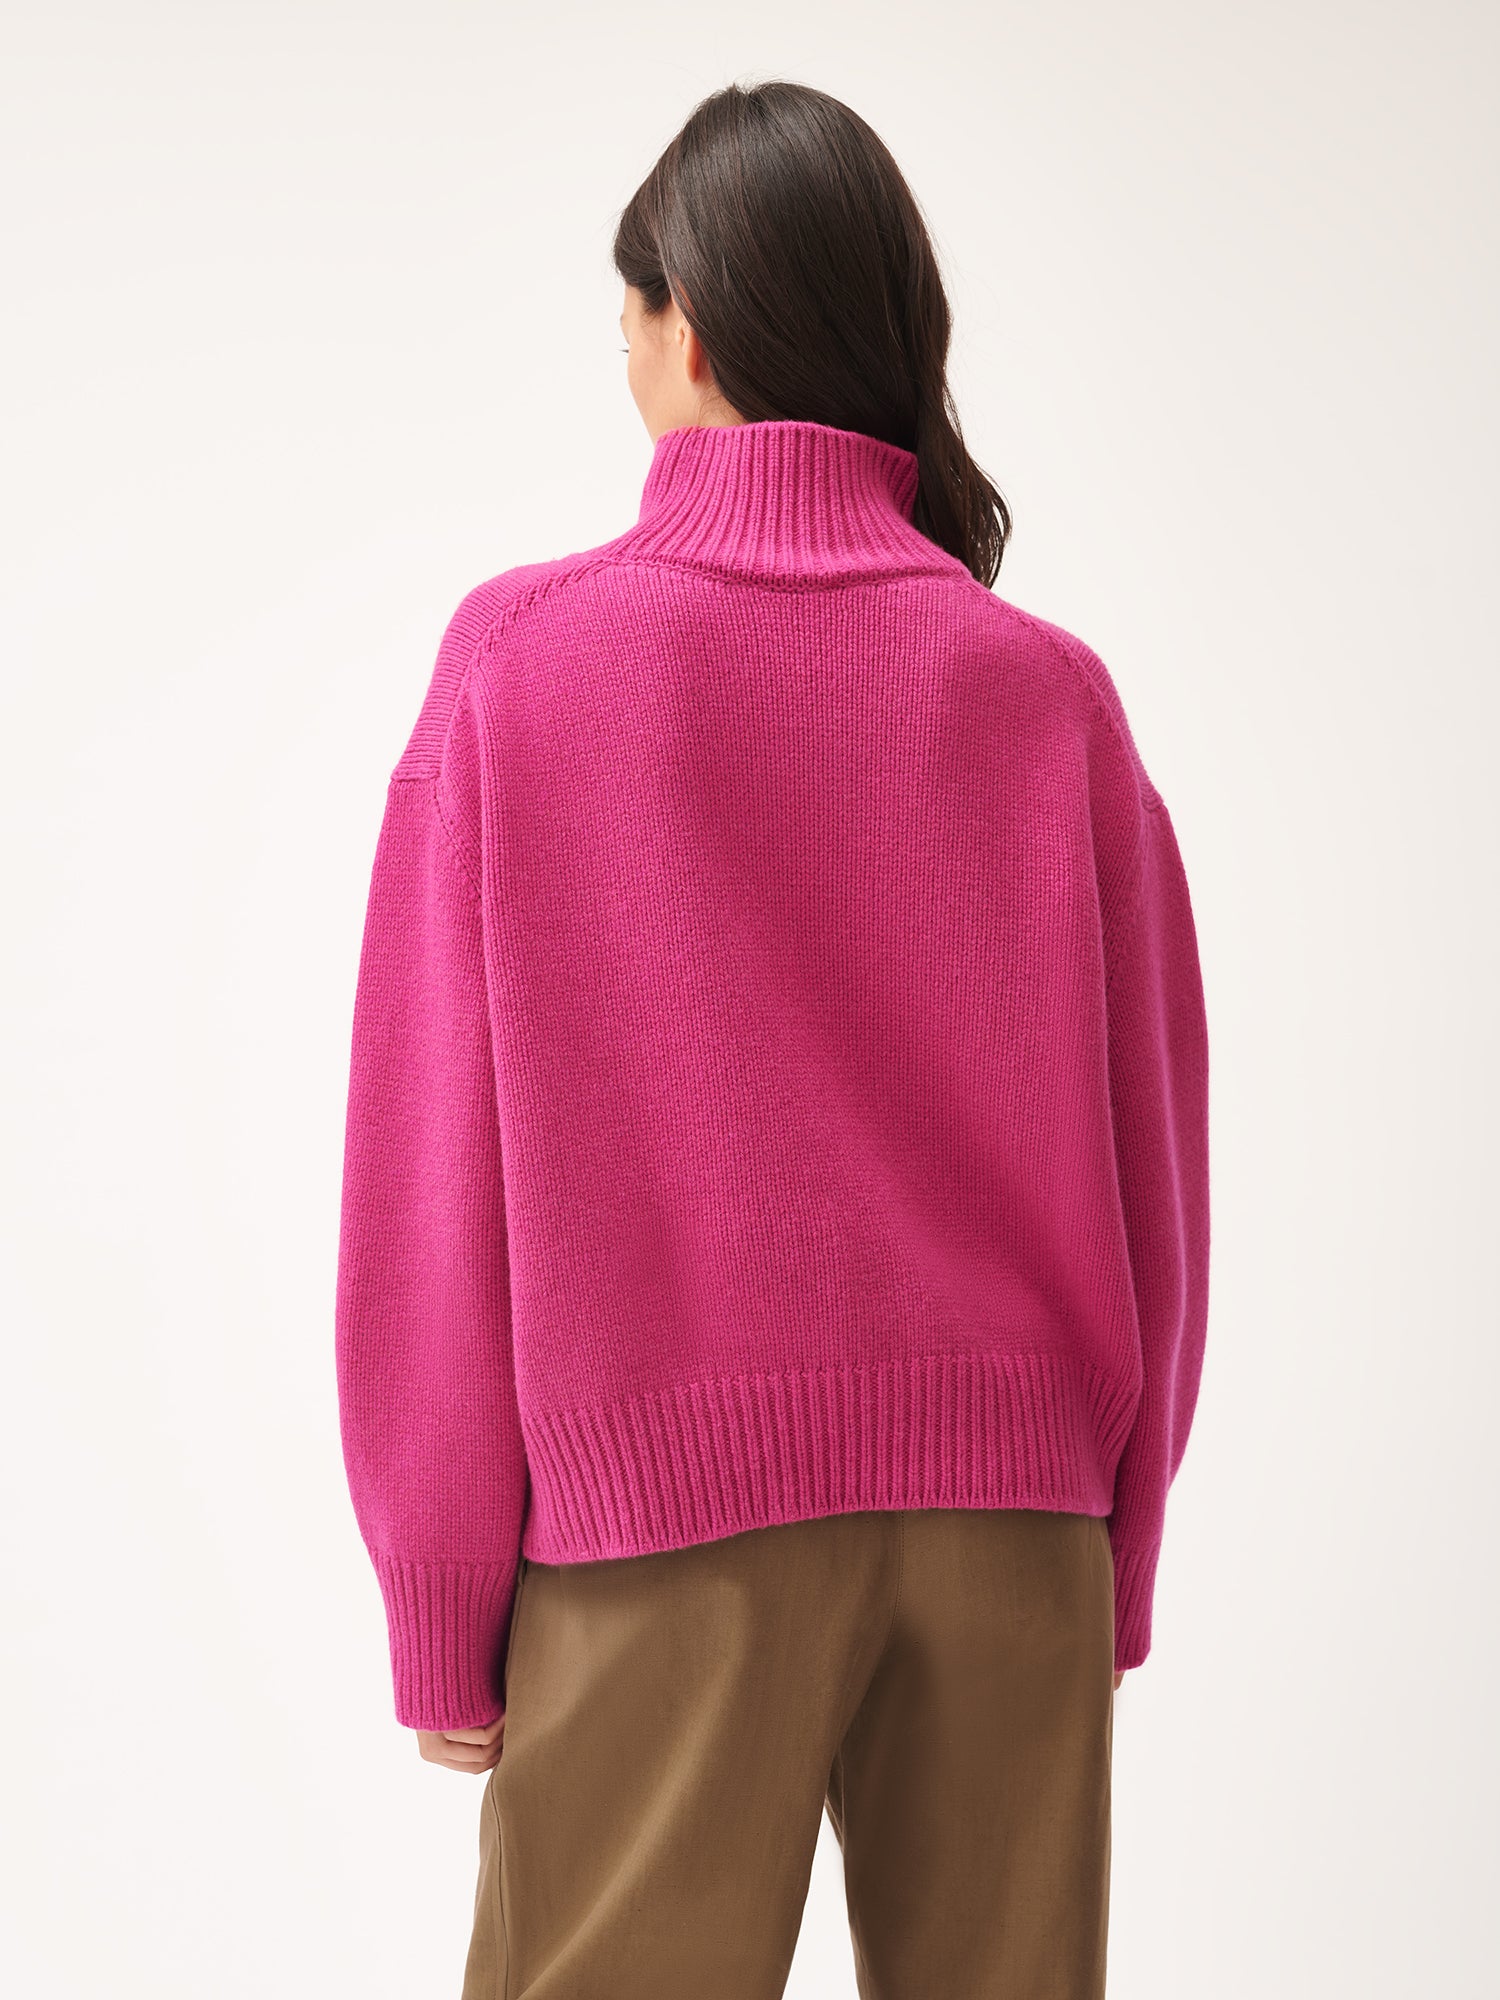 Womens_Recycled_Cashmere_Knit_Chunky_Turtleneck_Sweater_Tourmaline_Pink-2